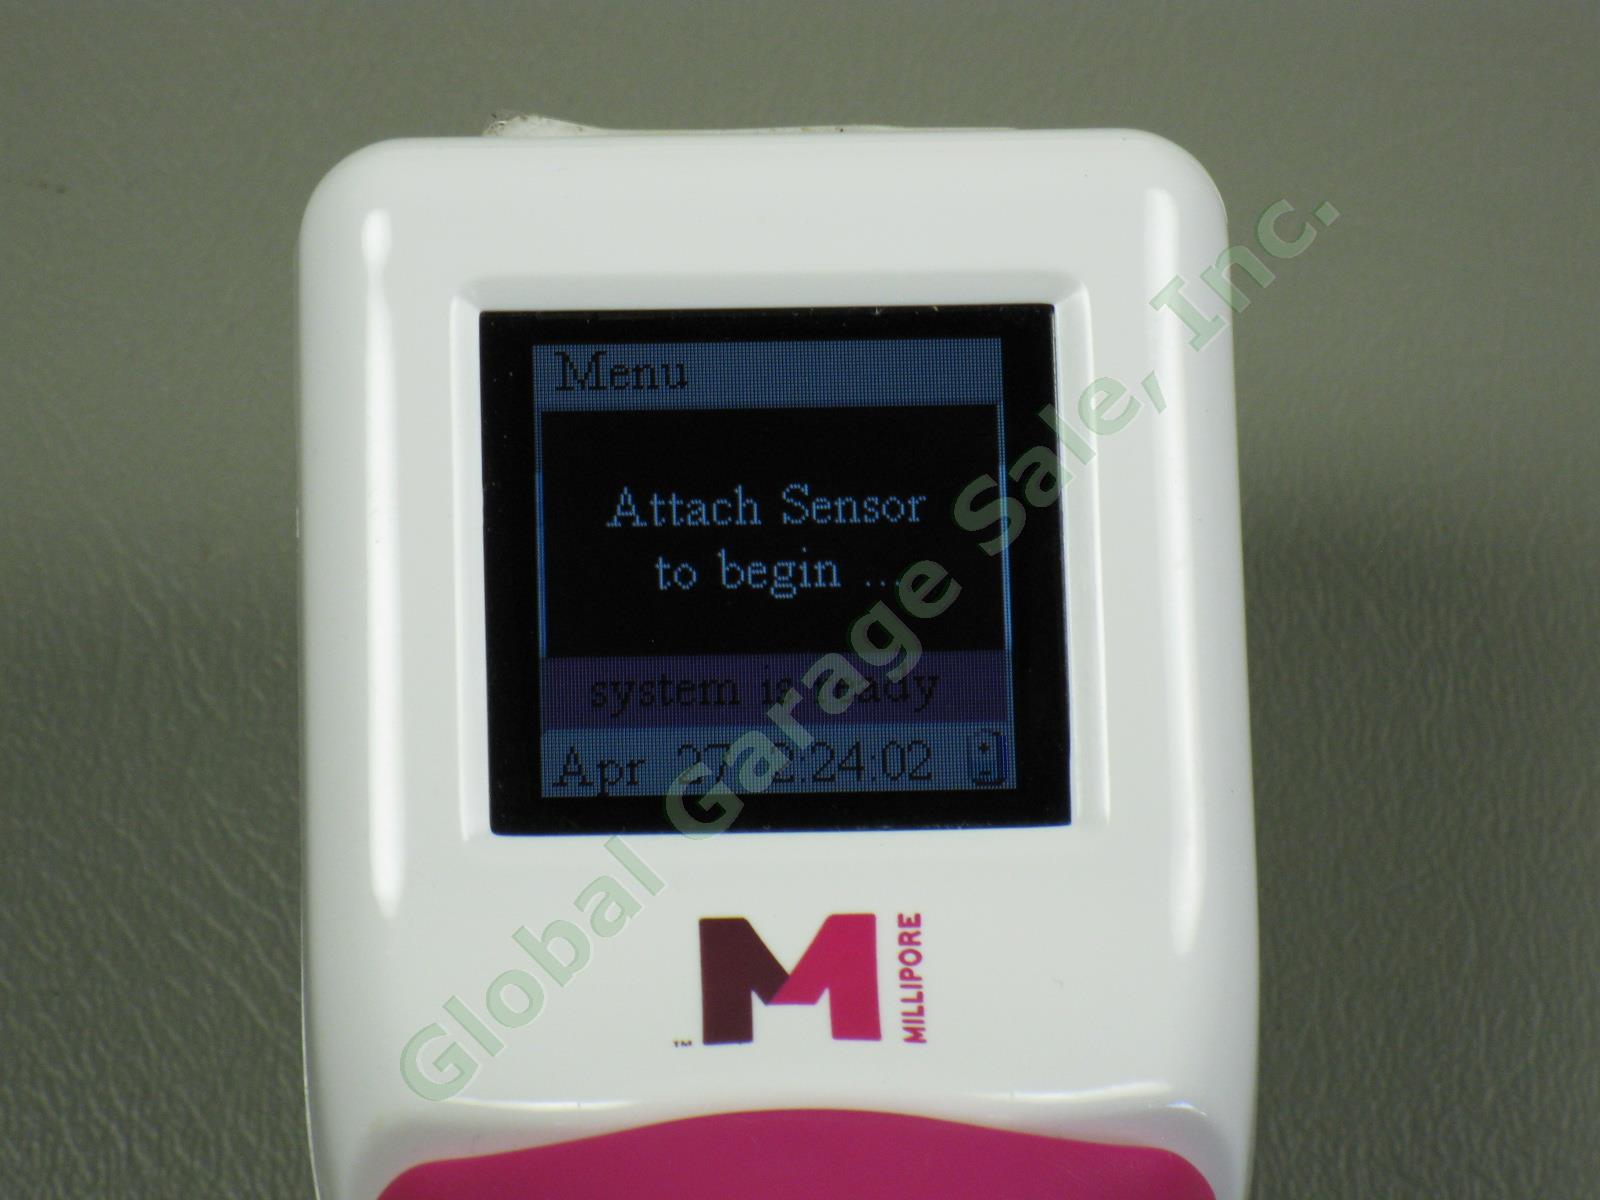 Millipore Scepter Handheld Automated Cell Counter Version 1.7-72 w/Sensors + Box 4